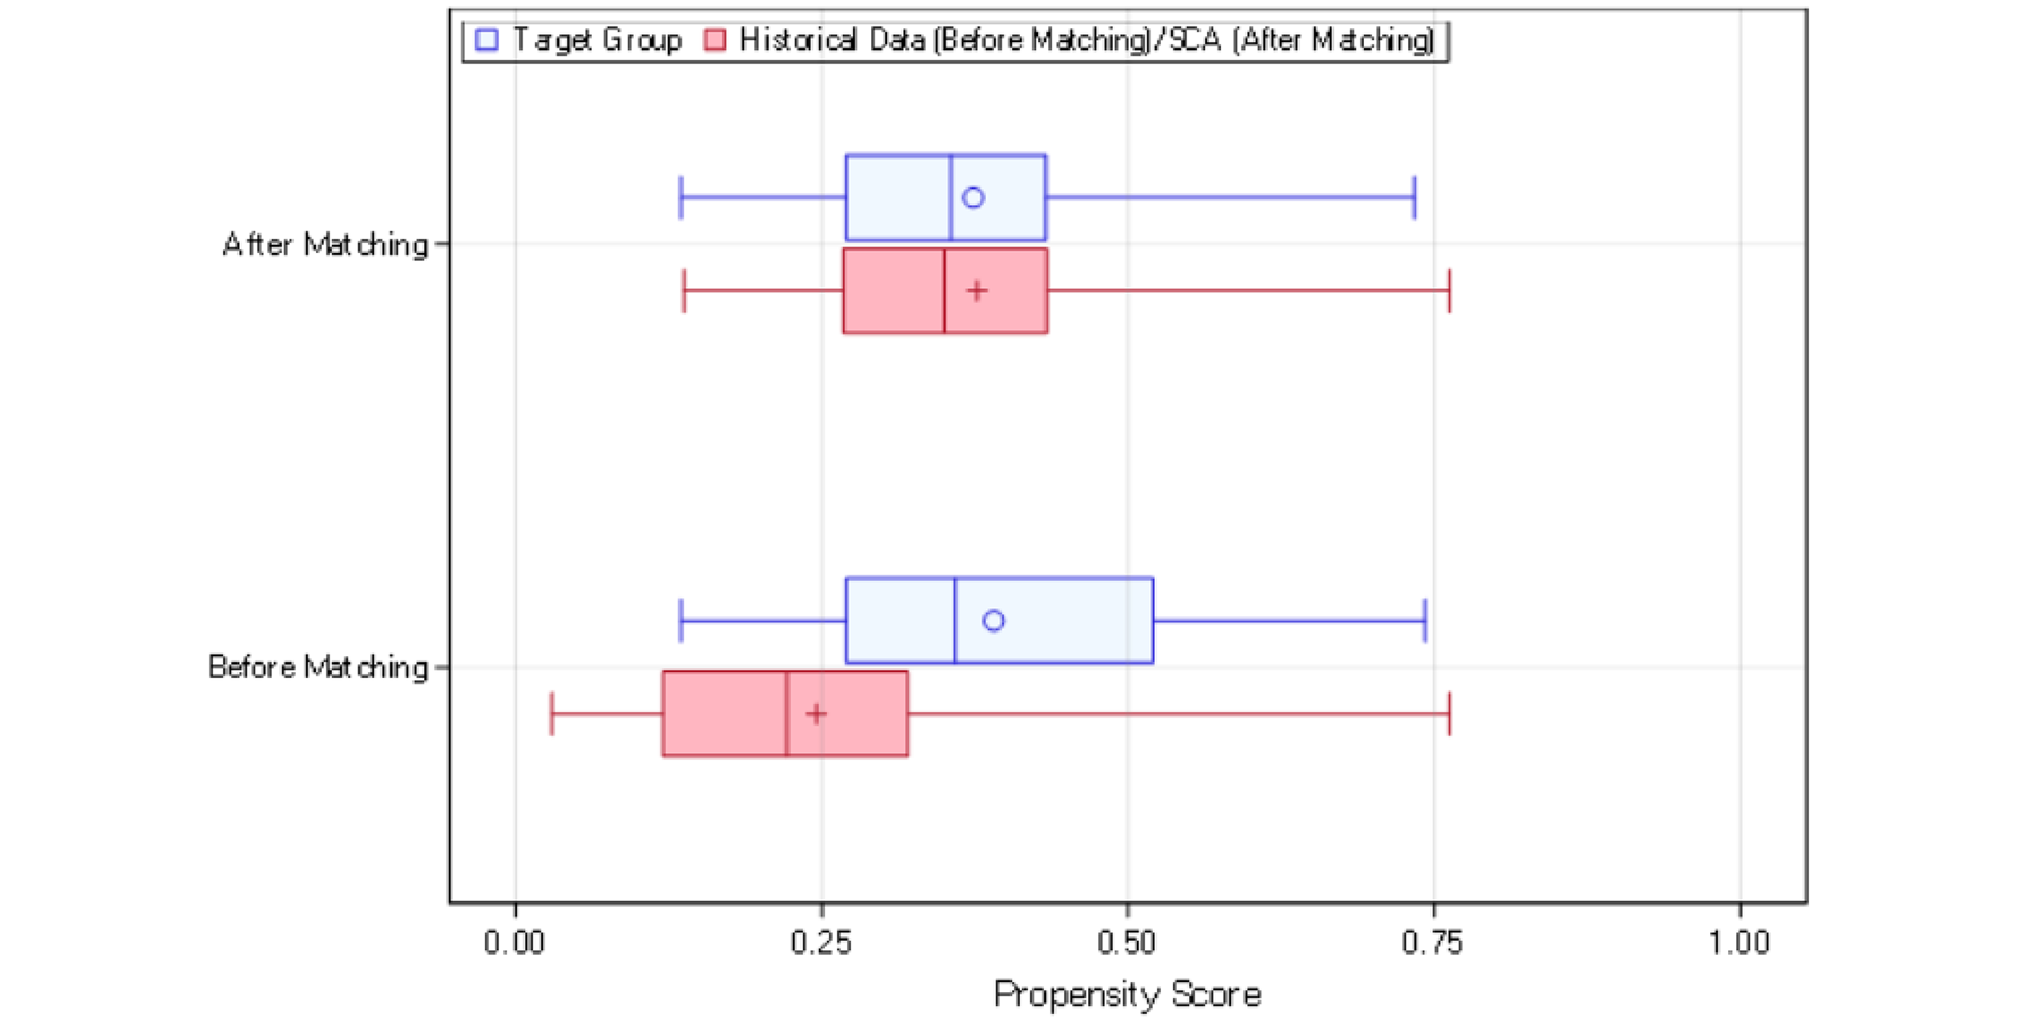 The propensity score distributions of patients in the SCHOLAR-3 study, before and after matching, are presented. Based on the propensity score distributions, the baseline characteristics (i.e., selected prognostic factors) between the patients in the target group (patients in the ZUMA-3 study modified intention-to-treat population who were experienced with blinatumomab or inotuzumab) and the historical data (data pool for synthetic control arm 2 [SCA-2]) were observed to be dissimilar before matching. After matching, the characteristics between the patients in the target group and SCA-2 were observed to be similar. Note that this was before the exclusion of the 9 patients who had protocol deviations.